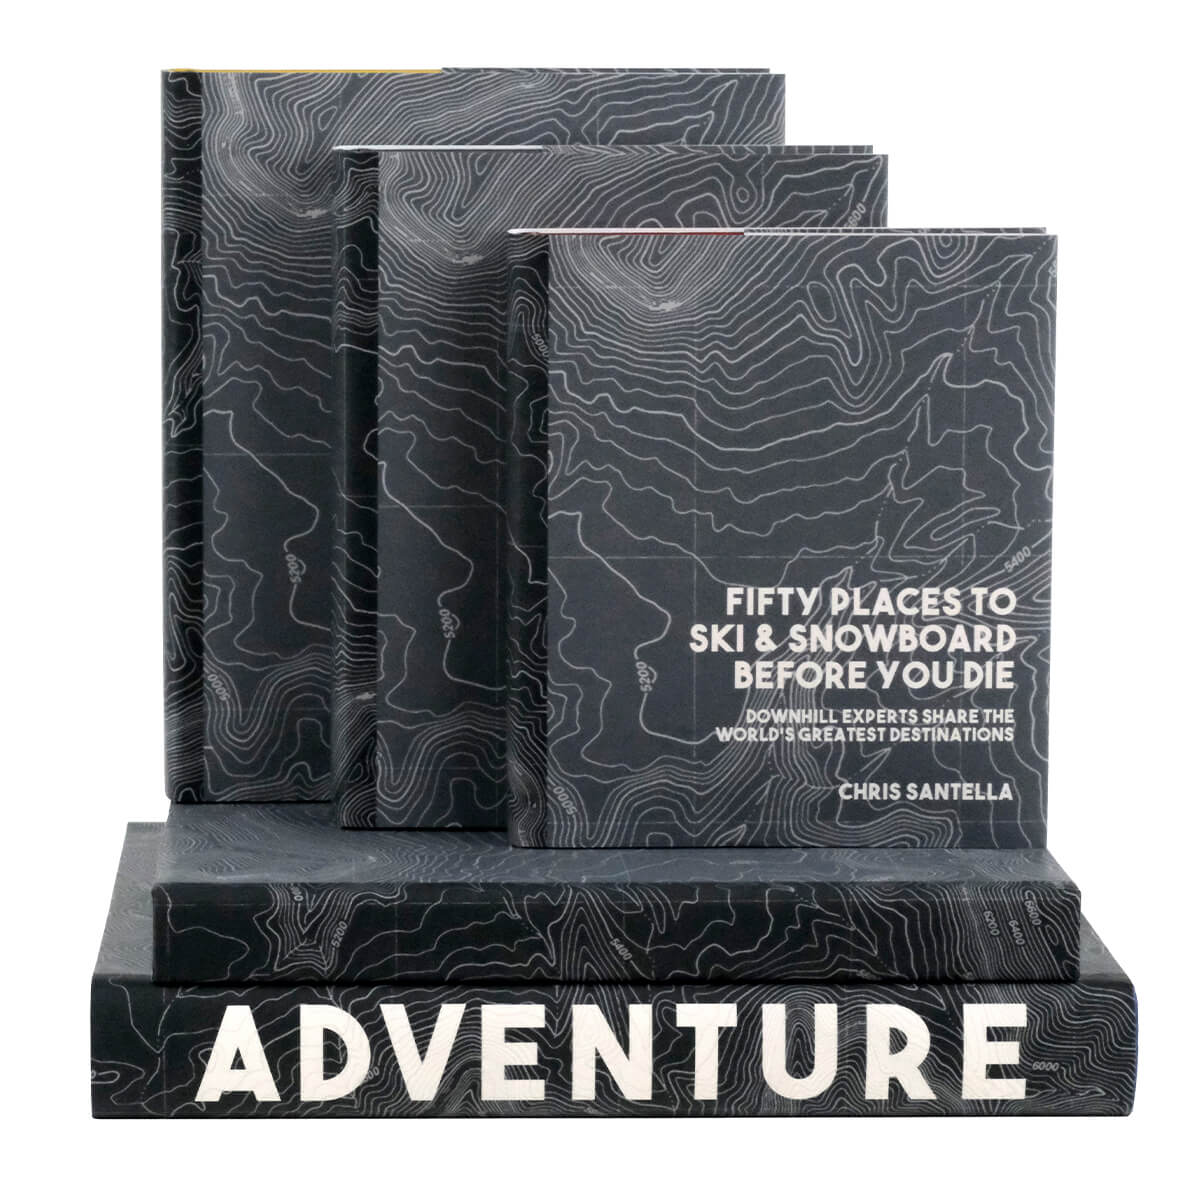 The Adventure set is a comprehensive visual history on surfing, cycling, mountaineering, incredible skiing and snowboarding destinations, and other life-changing adventures. Each volume features hundreds of photographs, illustrations, and essays capturing the spirit and energy of different adventures, traditions, and cultures. Makes a great gift!